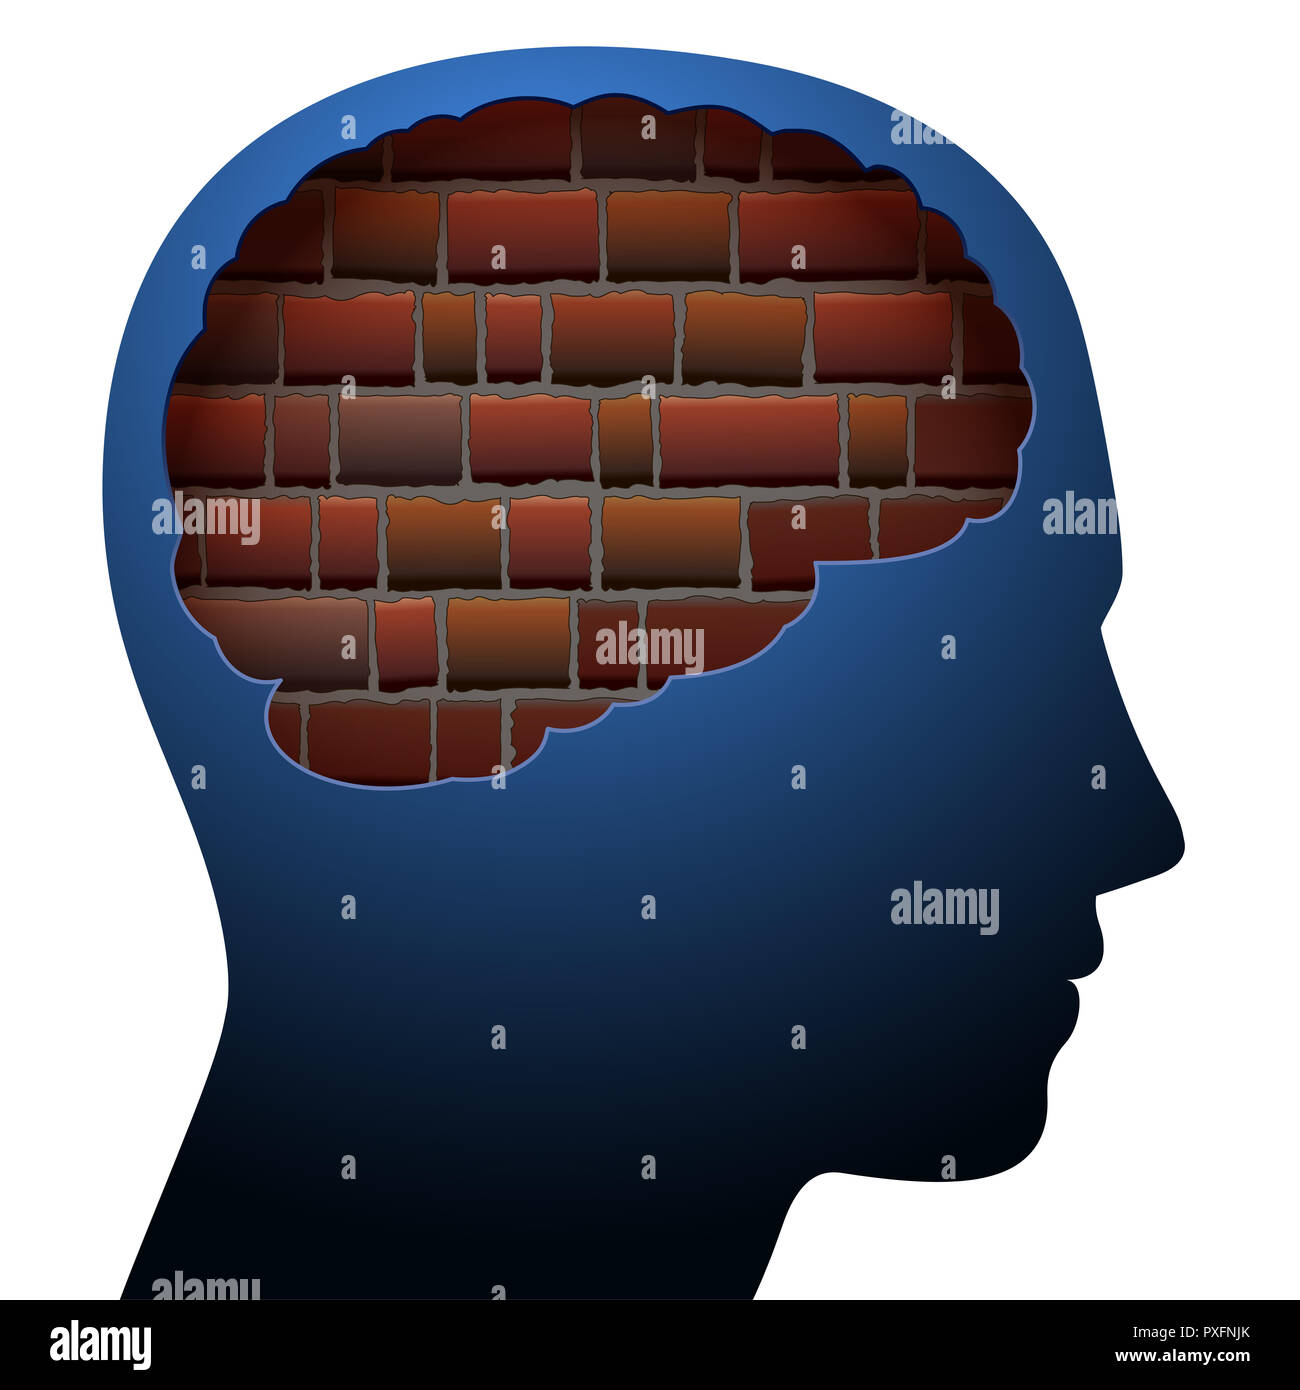 Mental block. Thinking barrier. Symbolized with a brick wall in the brain of a young person. Stock Photo